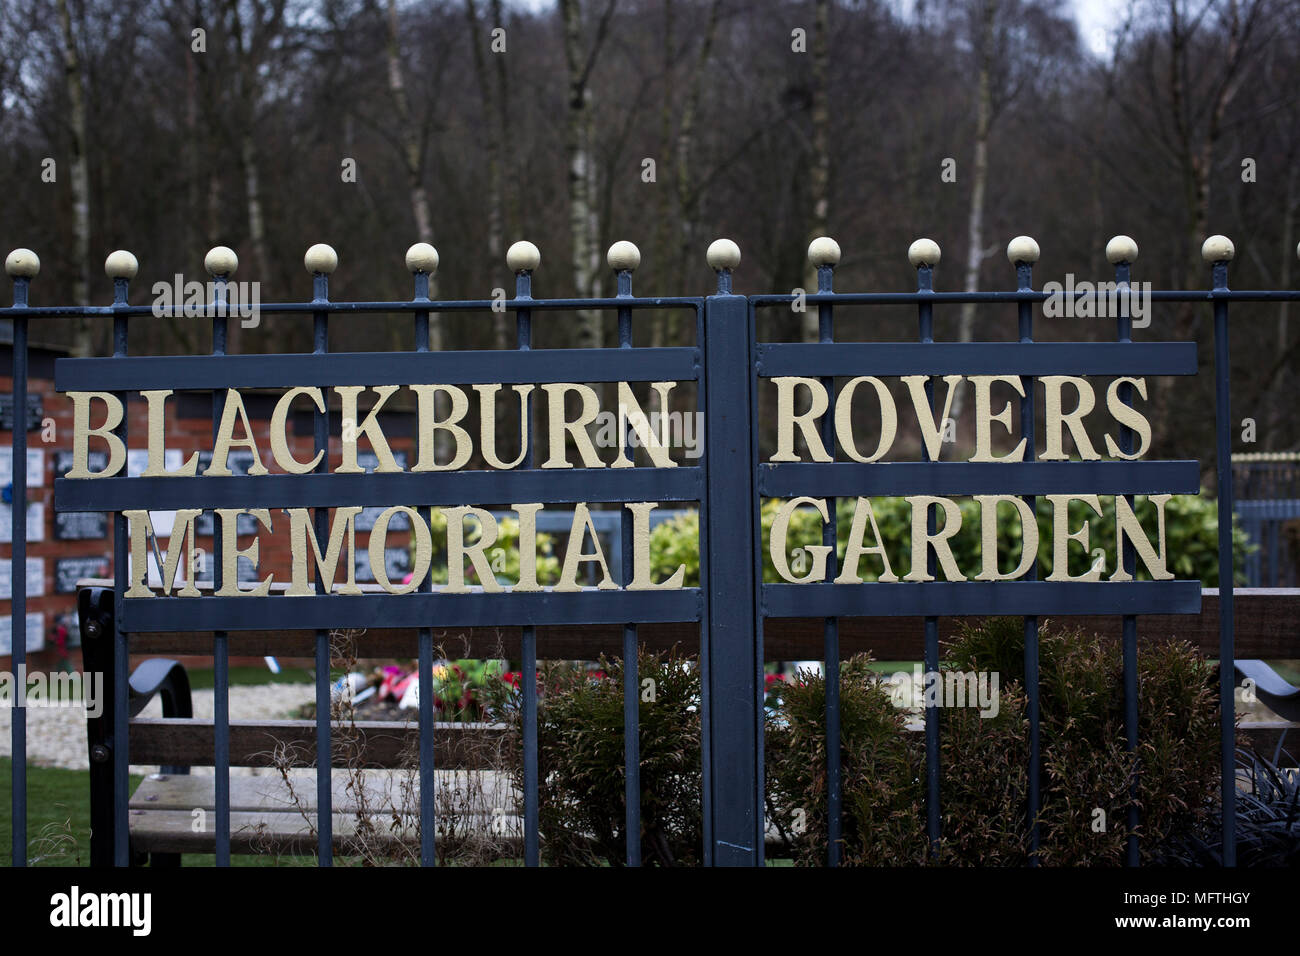 The Blackburn Rovers Memorial Garden, pictured before Blackburn Rovers played Shrewsbury Town in a Sky Bet League One fixture at Ewood Park. Both team were in the top three in the division at the start of the game. Blackburn won the match by 3 goals to 1, watched by a crowd of 13,579. Stock Photo